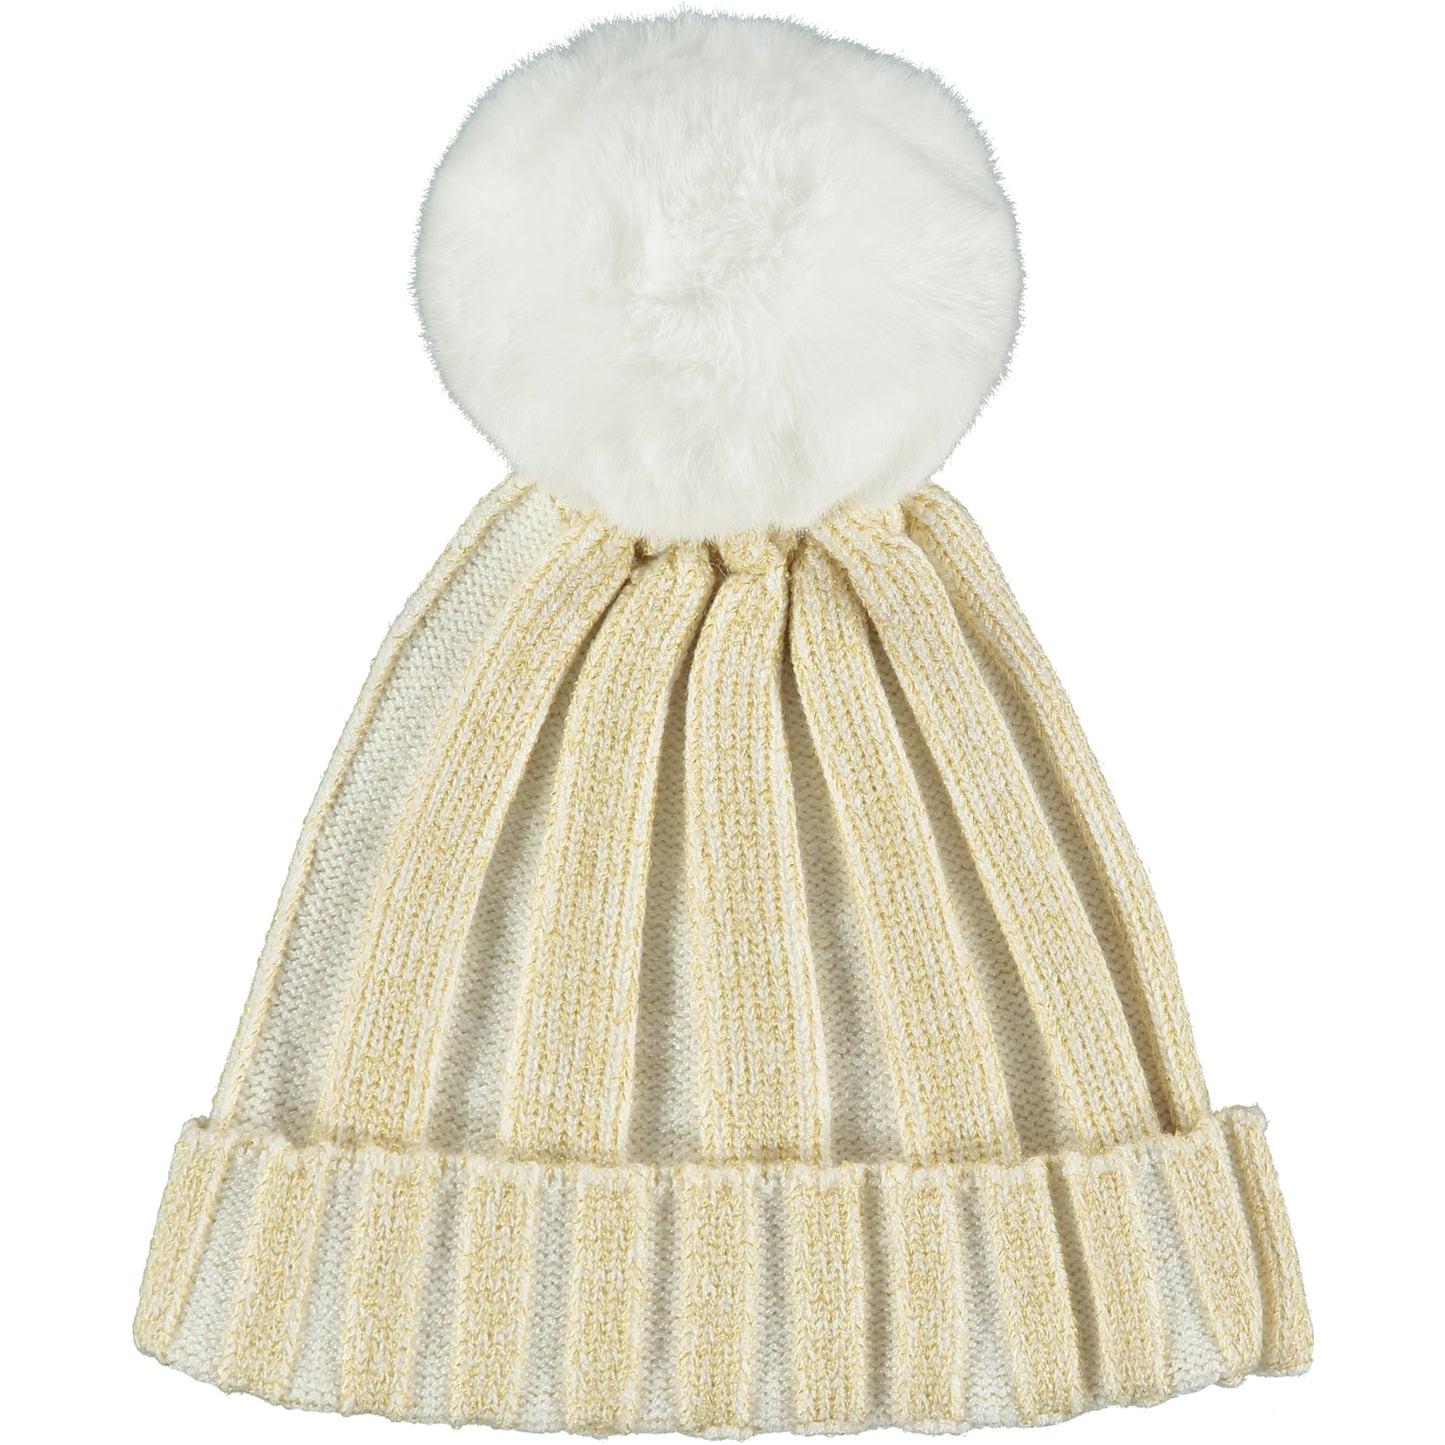 Girls Gold Wooly Hat